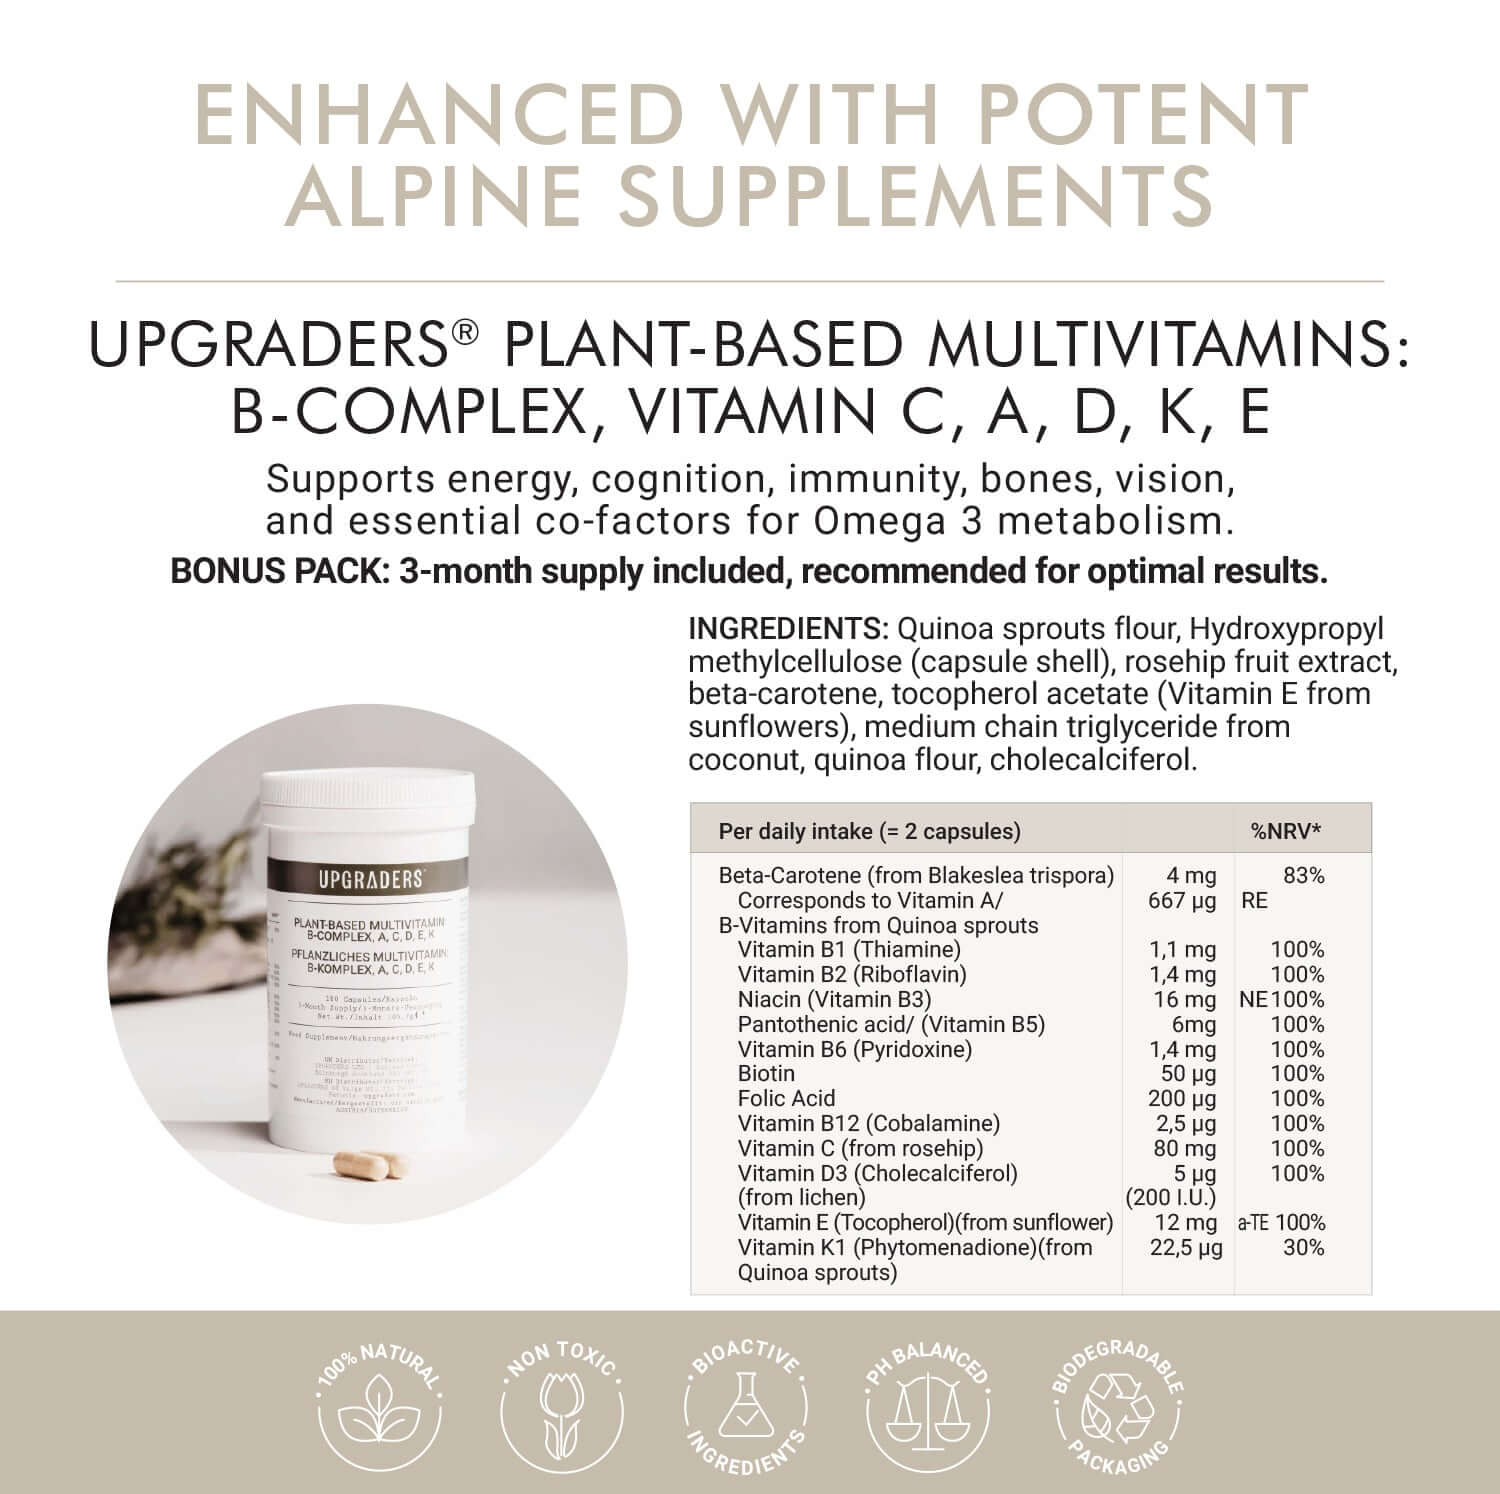 Plant-based Multivitamin: ingredients and benefits listed